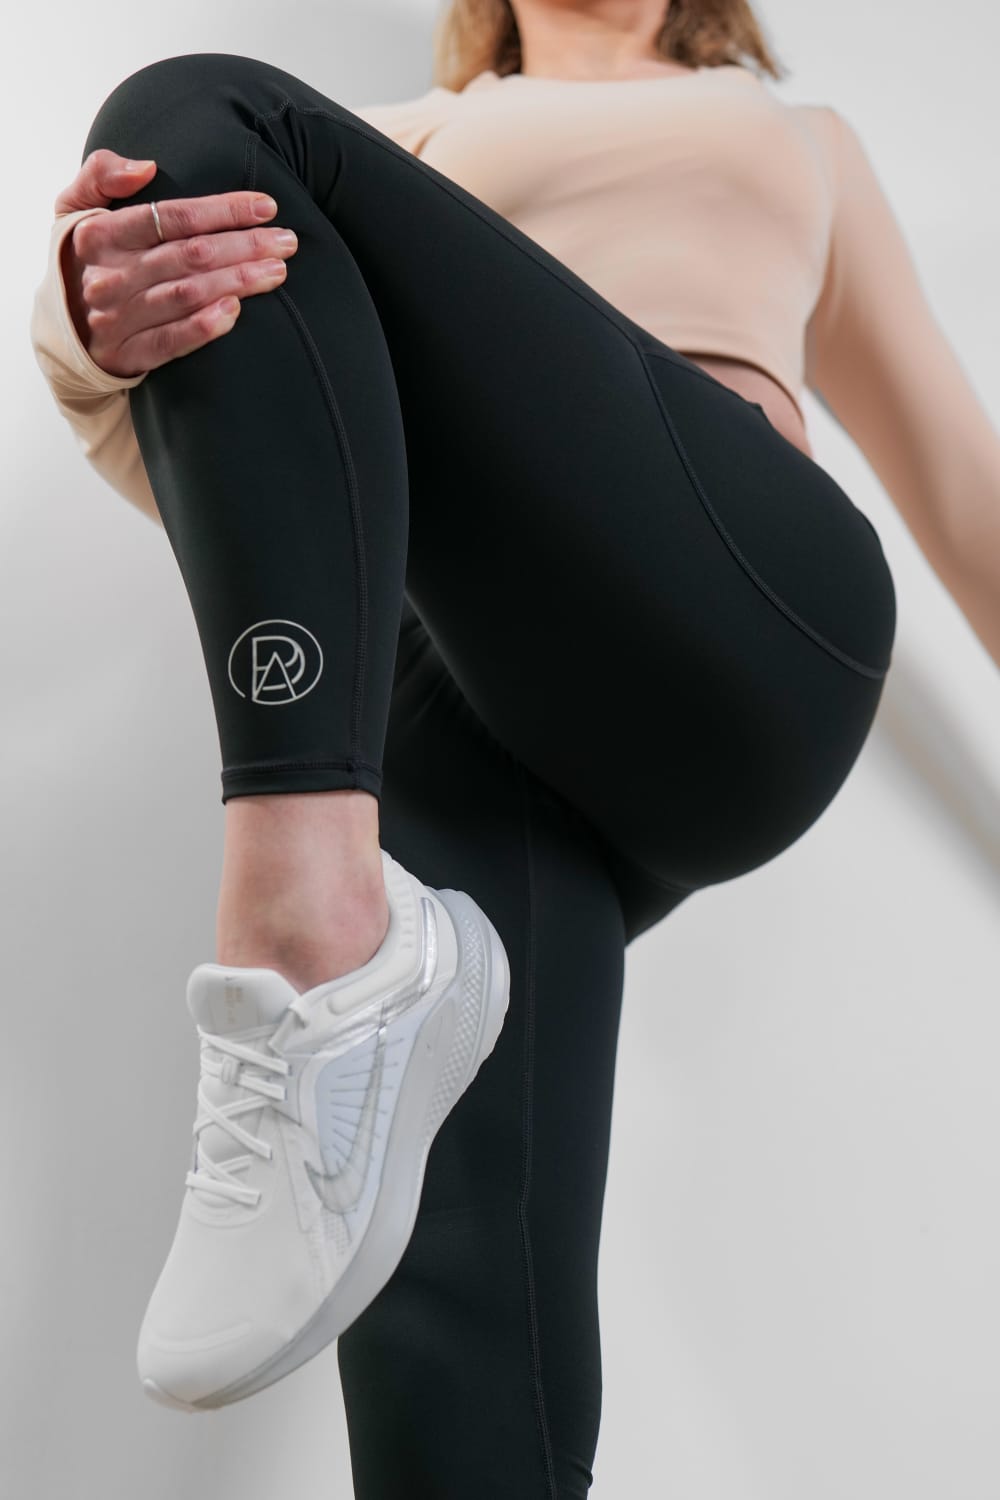 Elevate Your Comfort and Performance with PADA Knee Padded Yoga Leggings